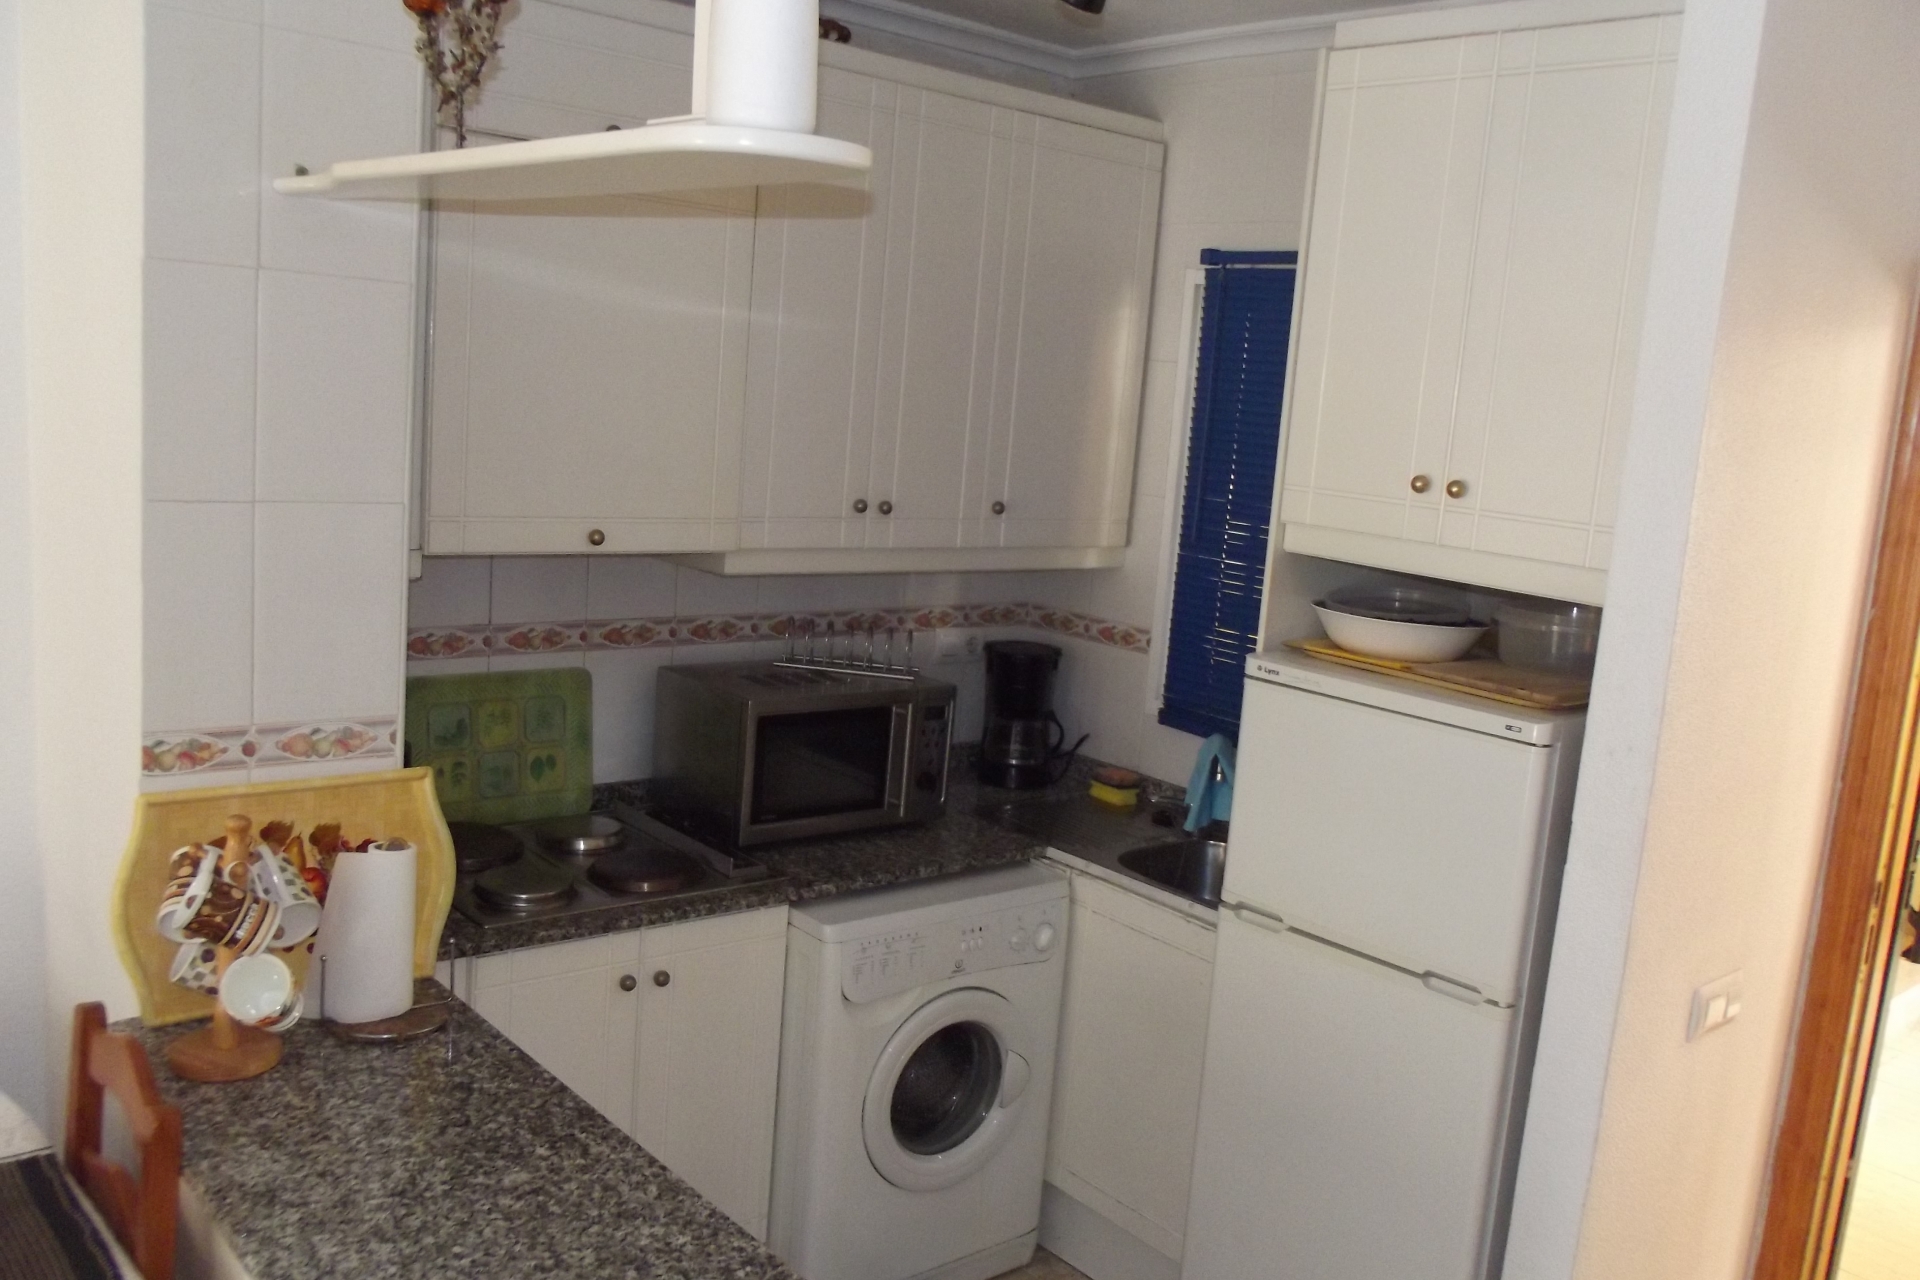 Property on Hold - Apartment for sale - Torrevieja - San Luis